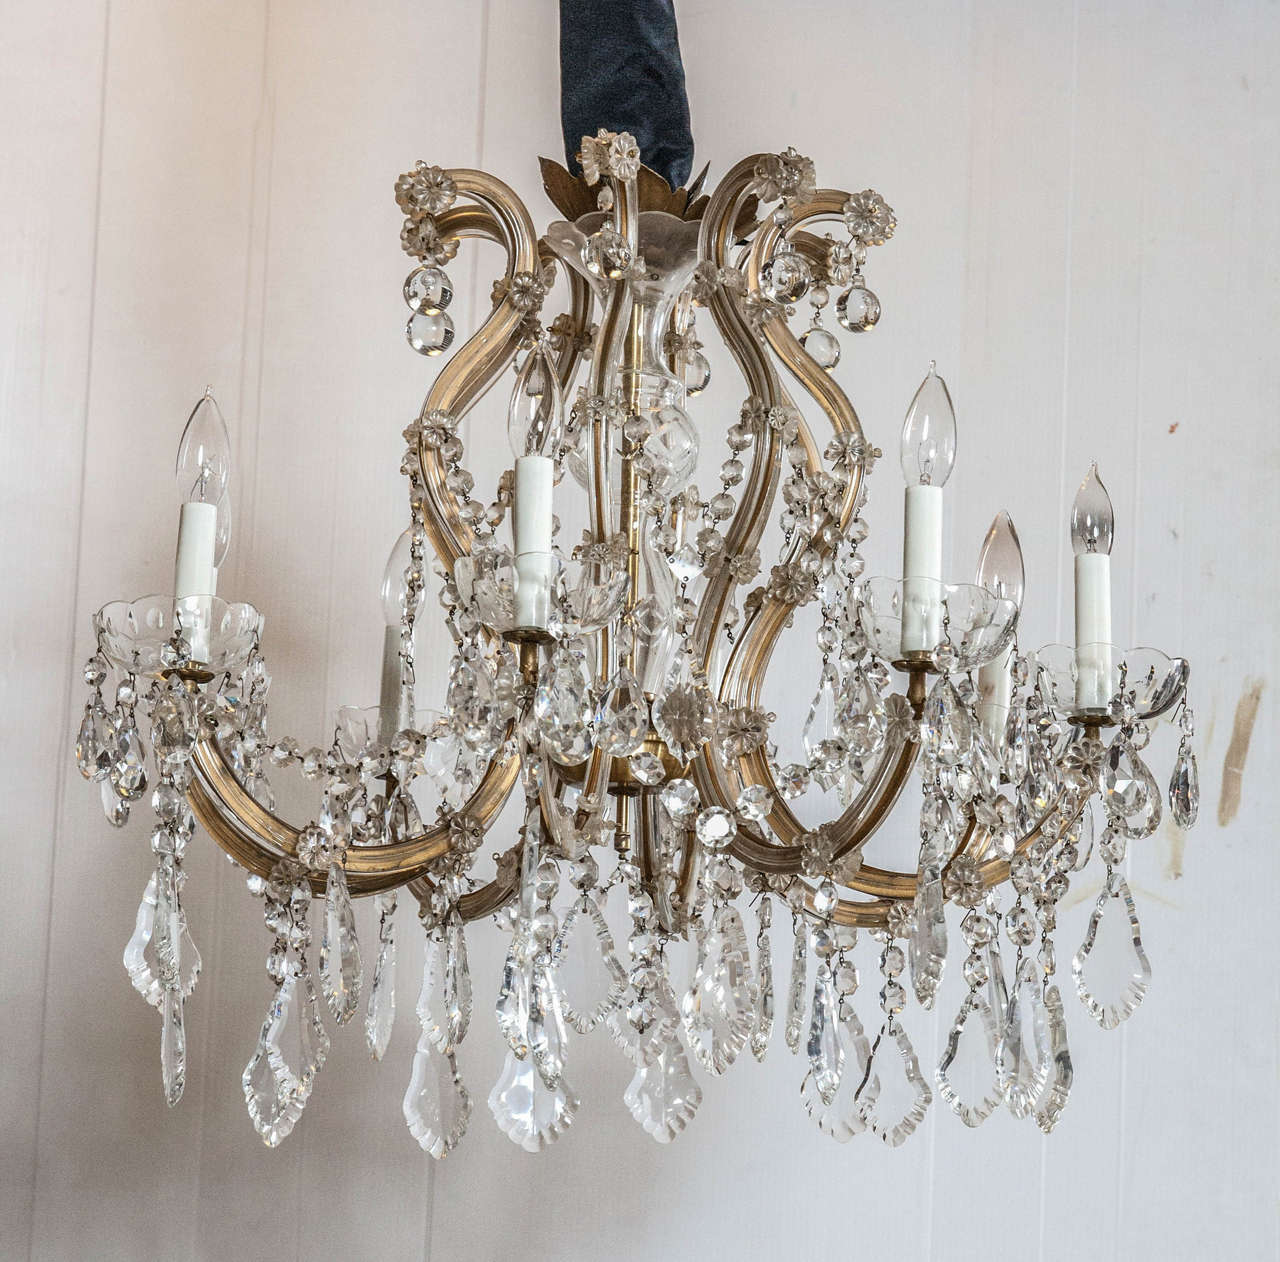 Hollywood Regency eight-light crystal chandelier. Exquisite and dainty S-shaped arms with shimmering crystals that reflect light for old world charm. Beautiful florets decorate the glass arms and sparkling crystals galore. This wonderful piece adds